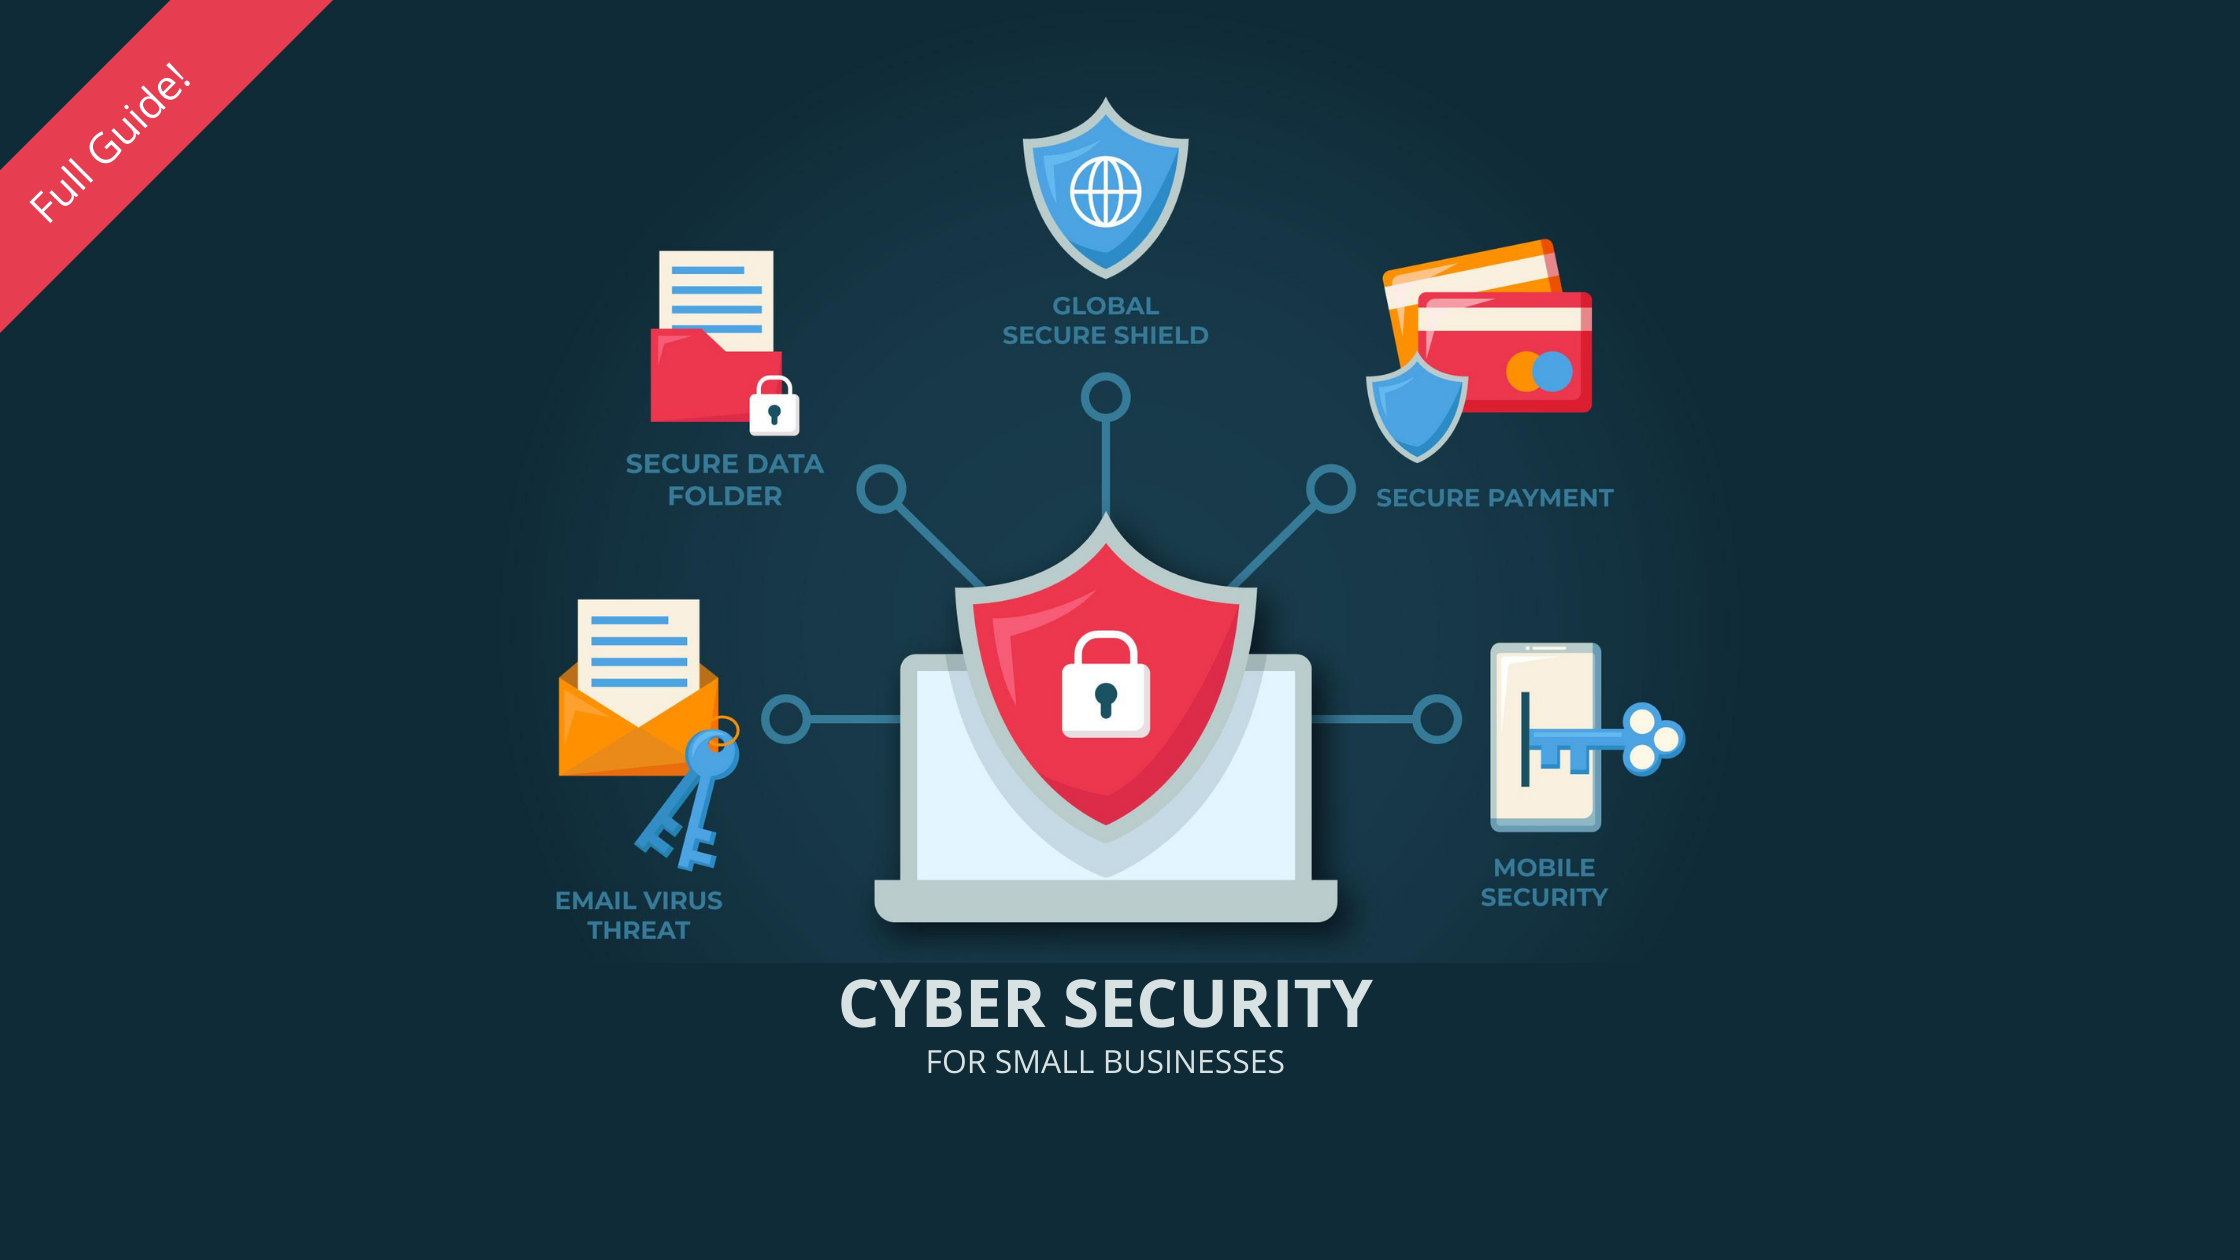 Cyber Security for Small Businesses